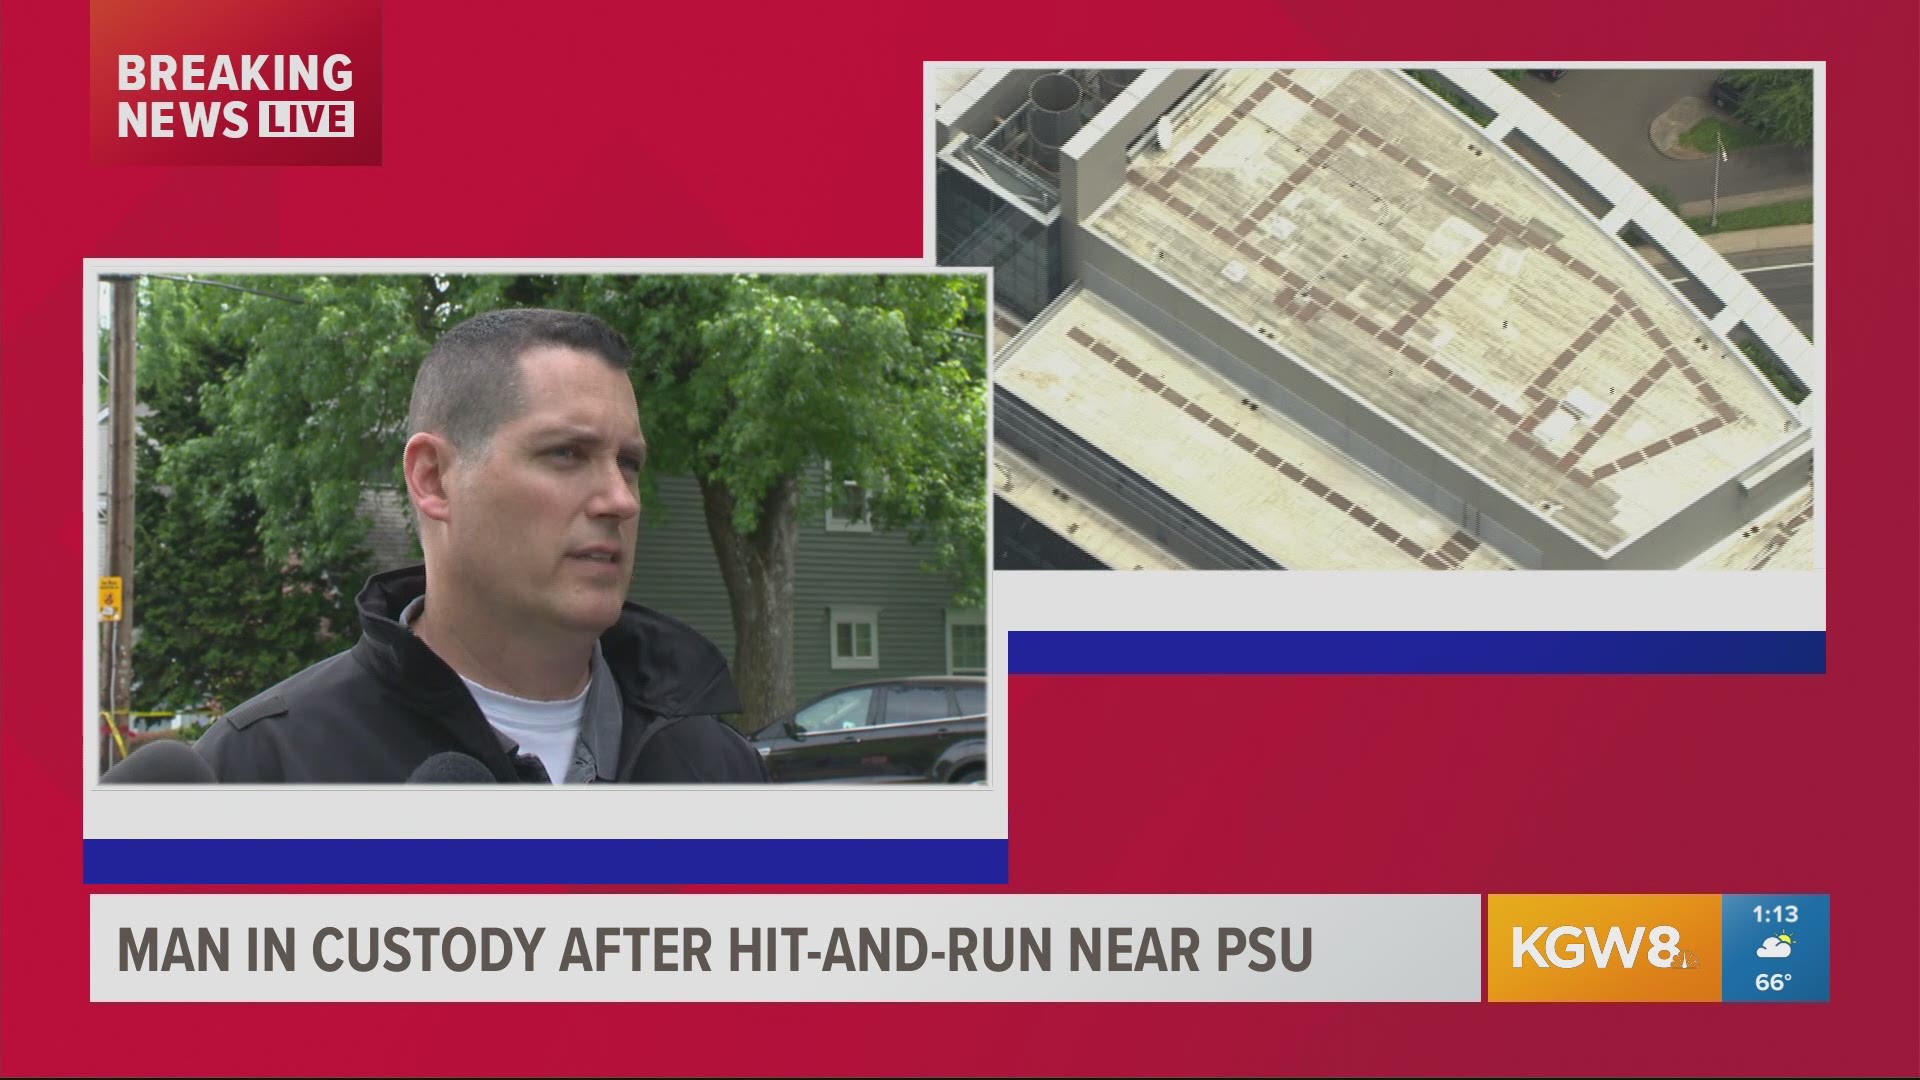 Portland police Sgt. Pete Simpson gives an impromptu briefing on the hit-and-run at Portland State University that injured three people